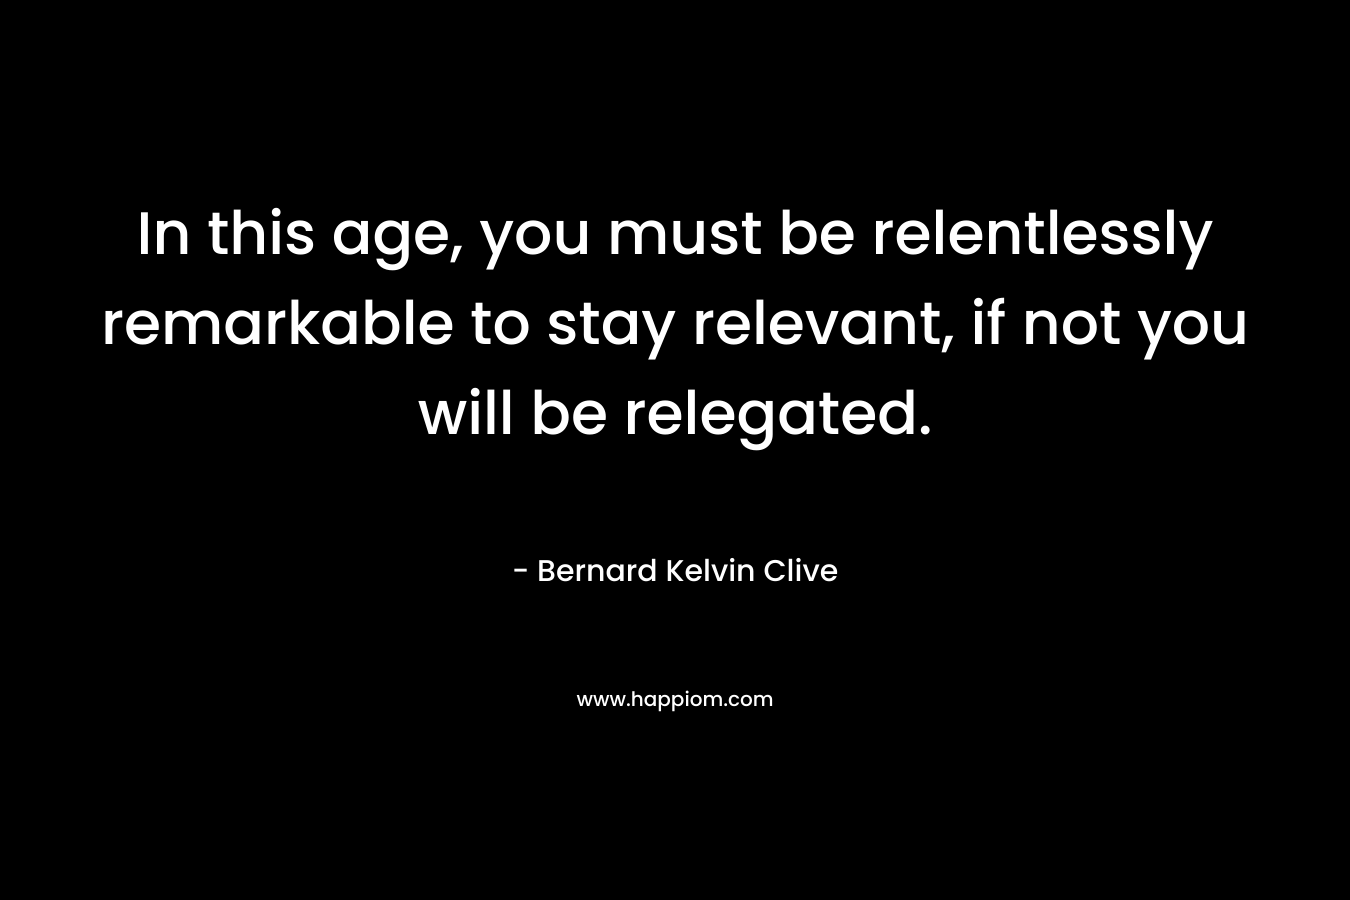 In this age, you must be relentlessly remarkable to stay relevant, if not you will be relegated. – Bernard Kelvin Clive